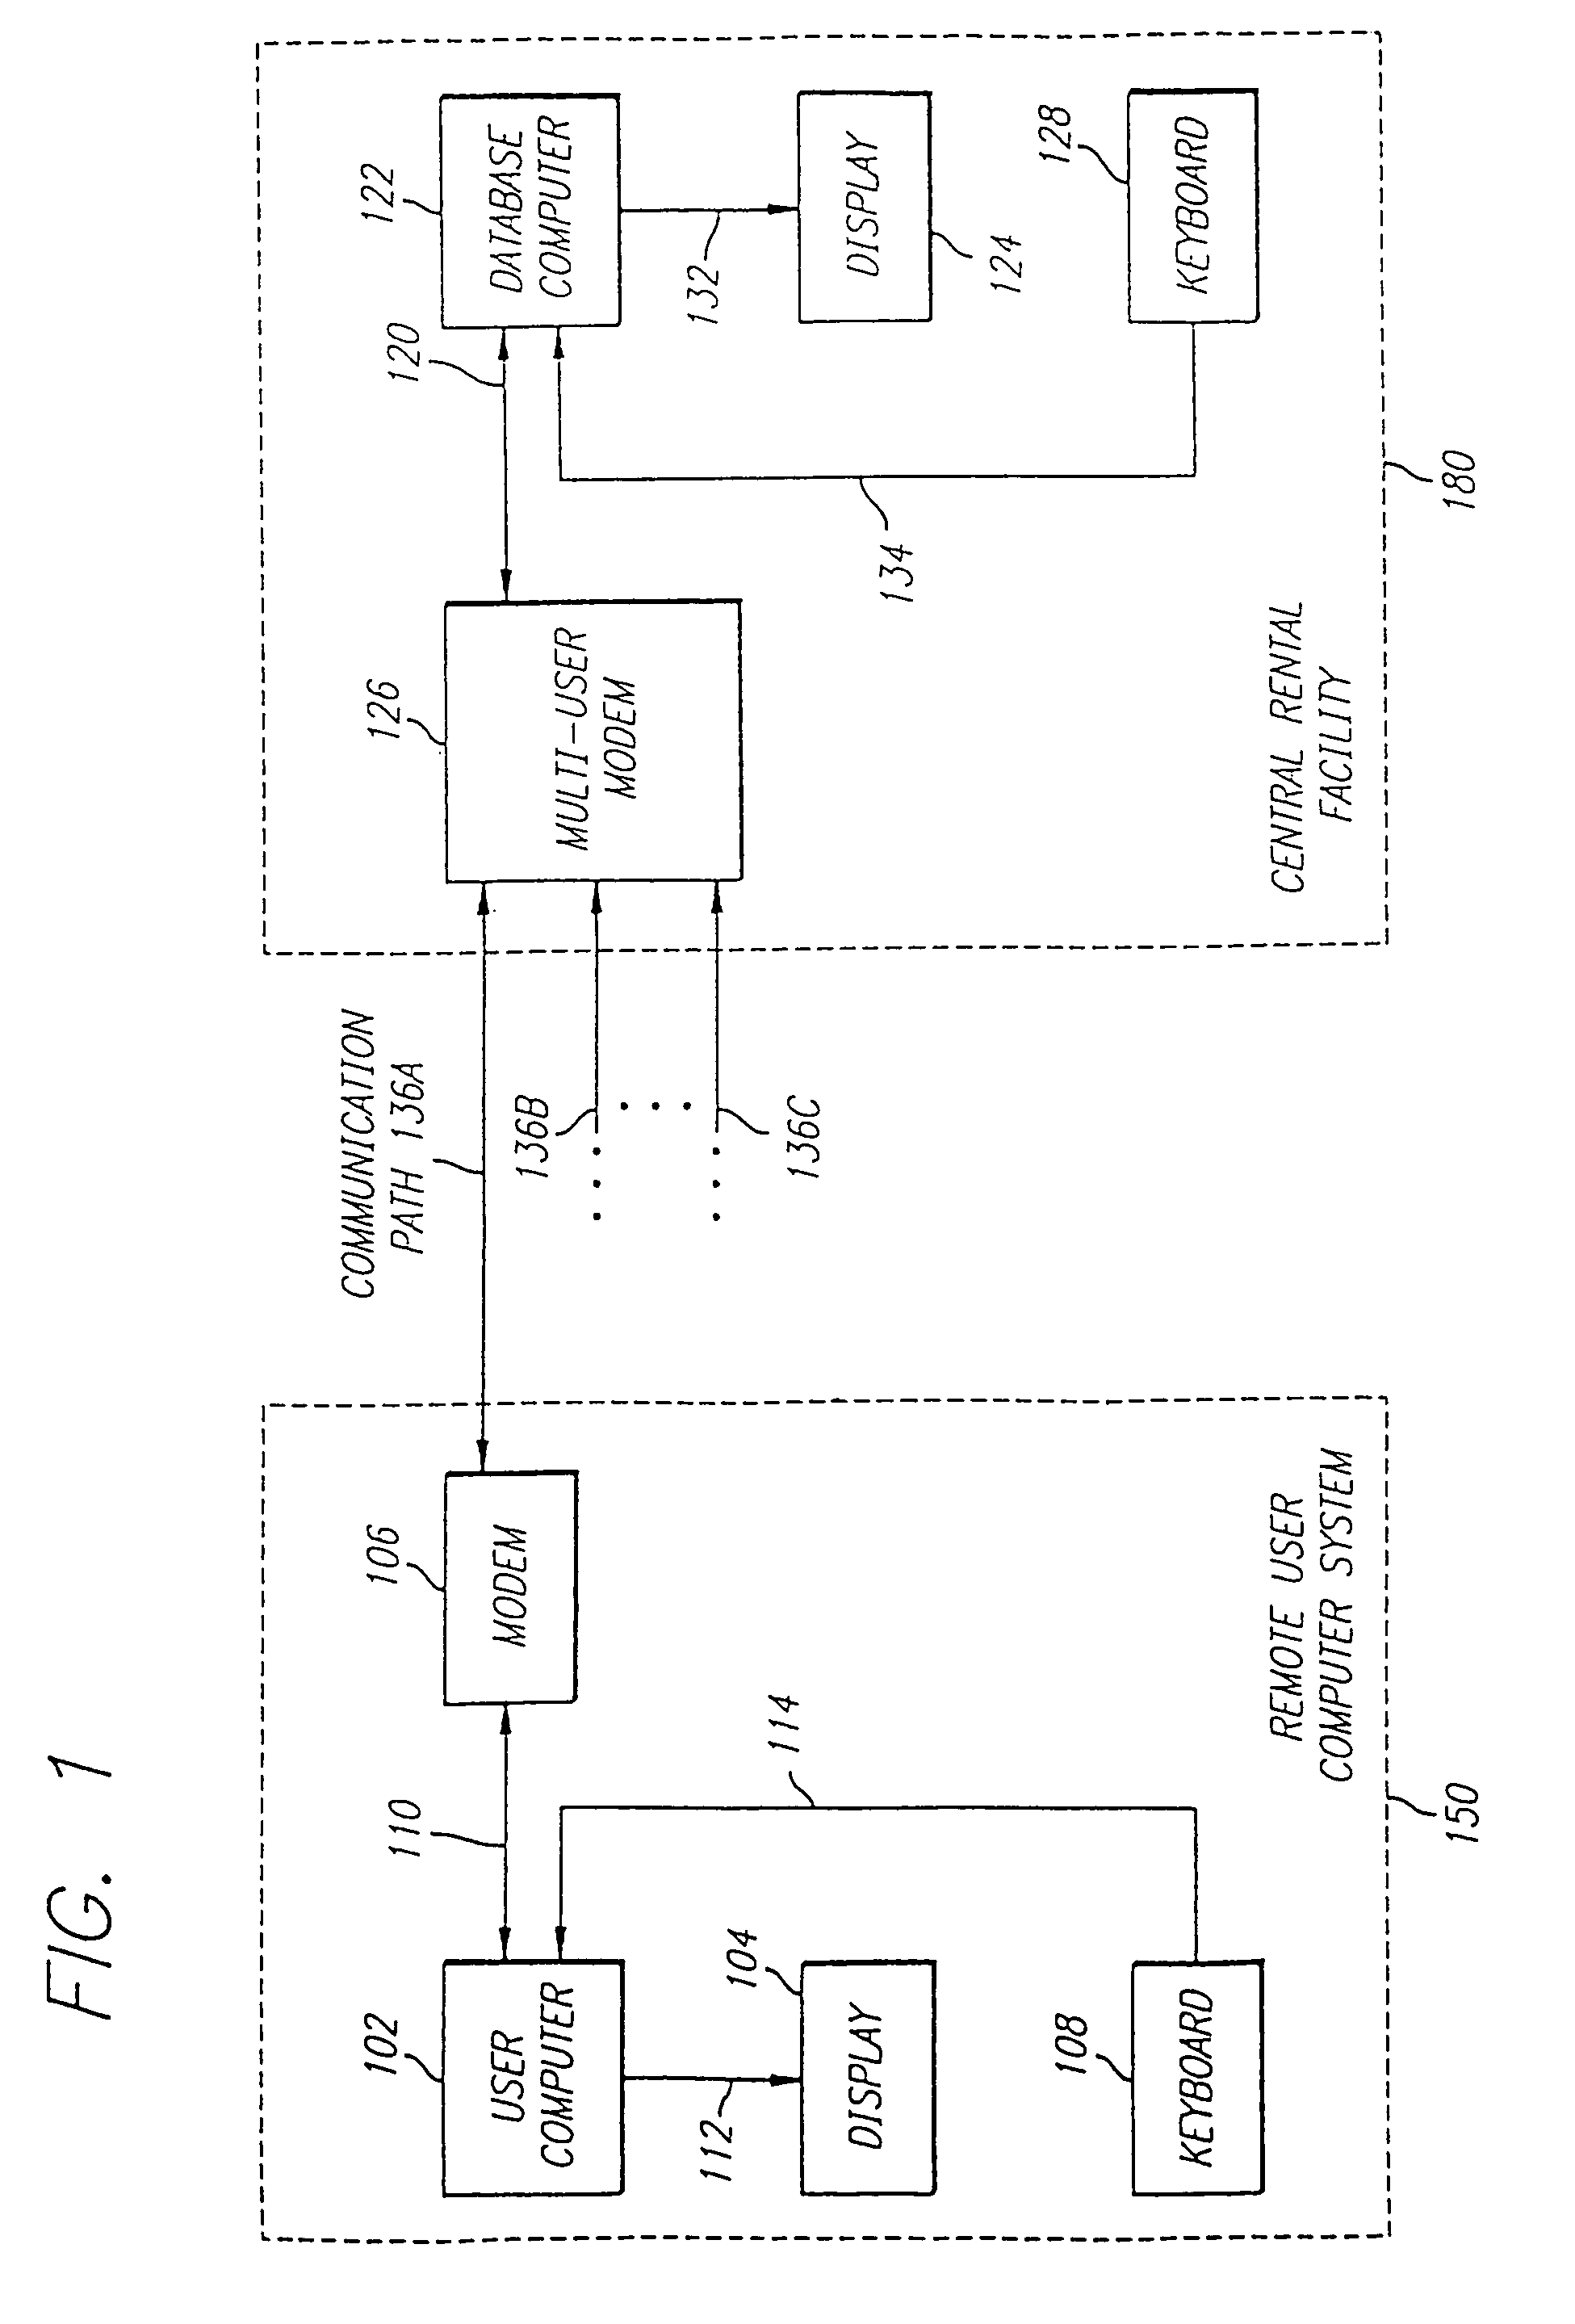 System and method for transferring items having value